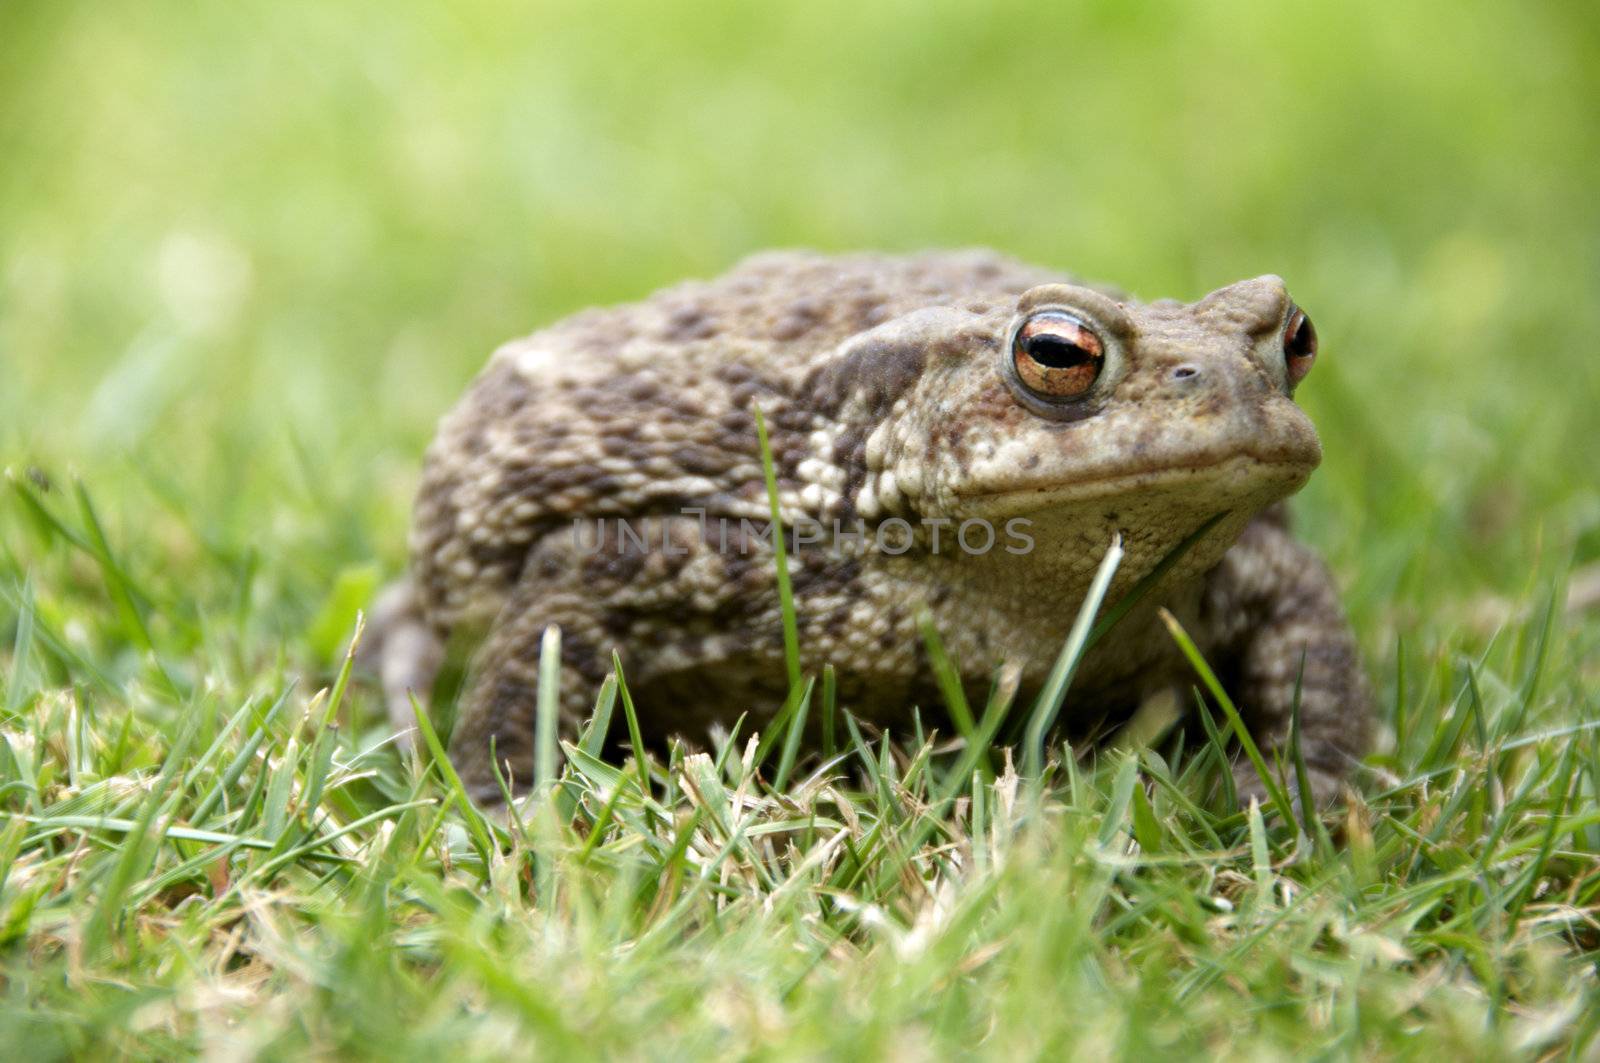 A brown frog siting in the grass